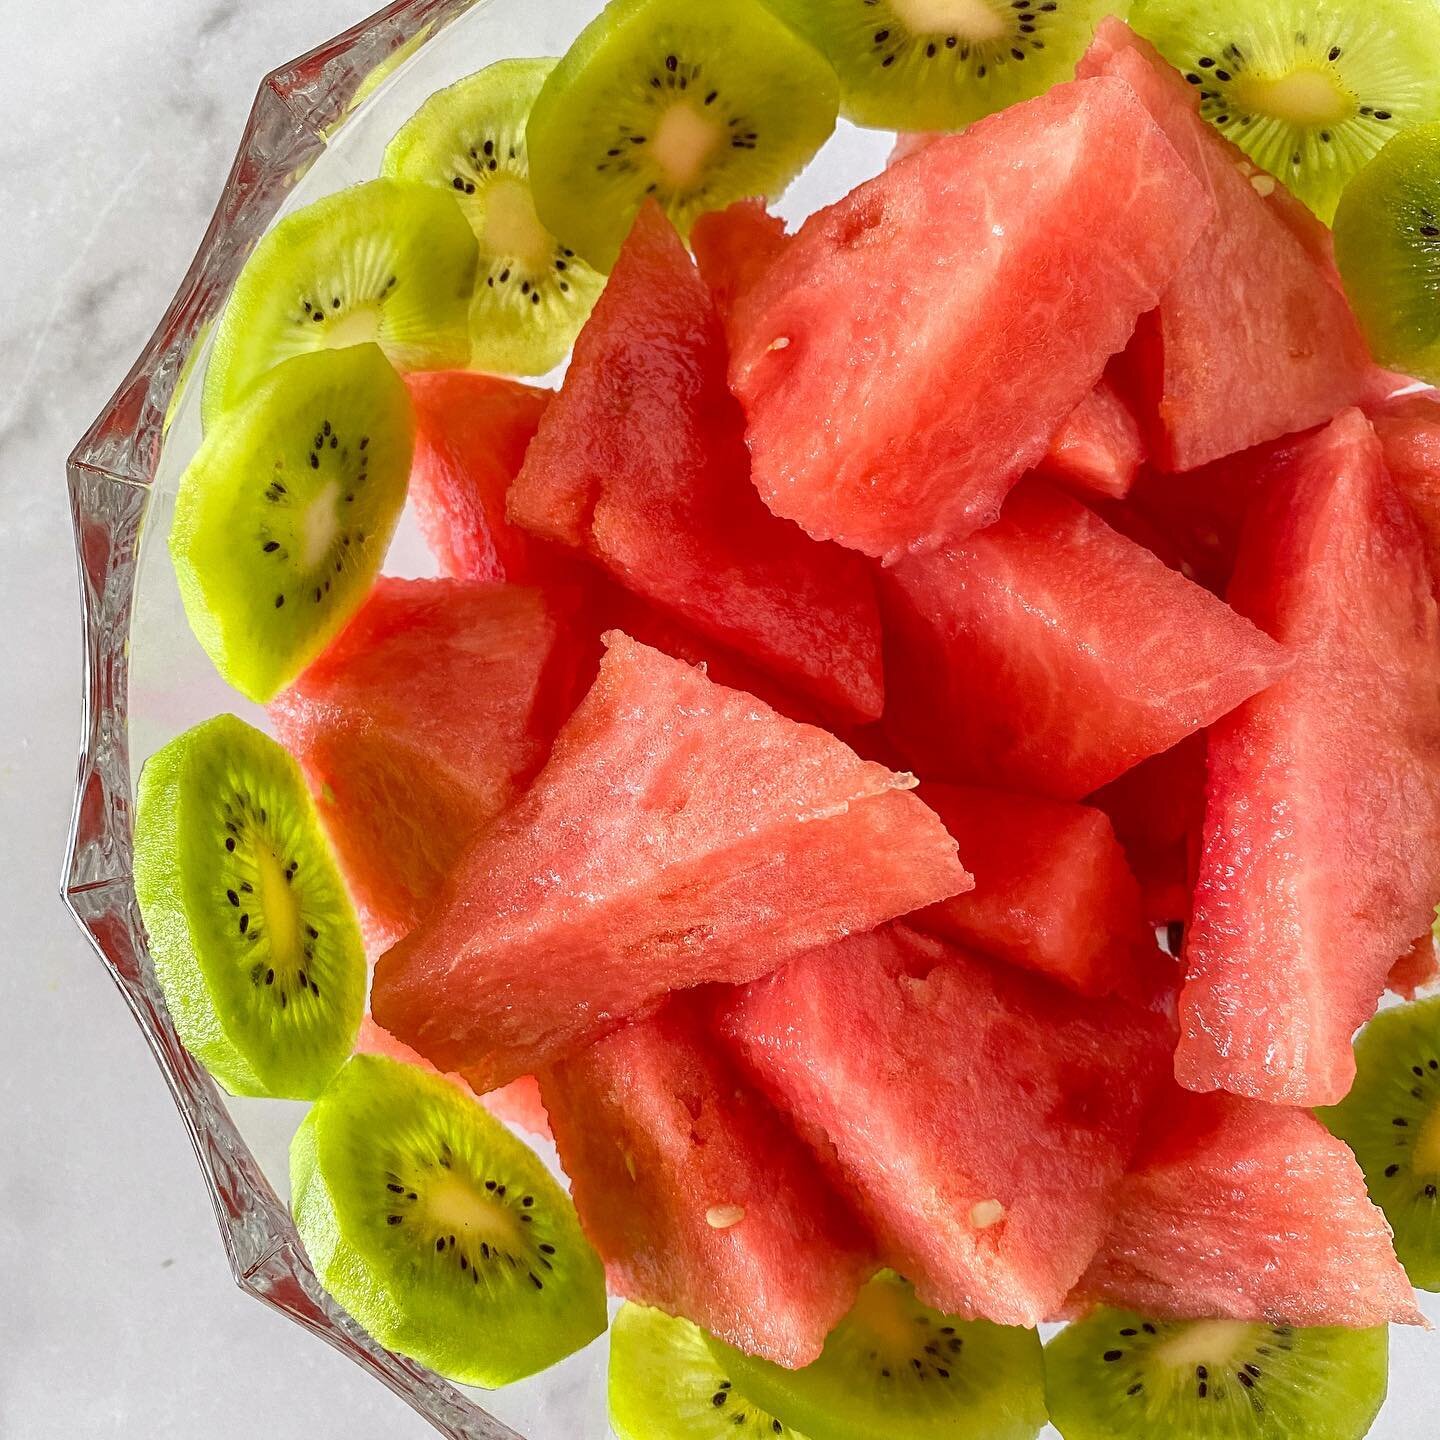 Watermelon season!🍉 😎It is hot out and they are a sweet way to stay hydrated. Enjoy them fresh or frozen for a treat by the pool, beach or bbq.  Not only are they a refreshing crowd pleaser, they have wonderful health benefits from their powerful p